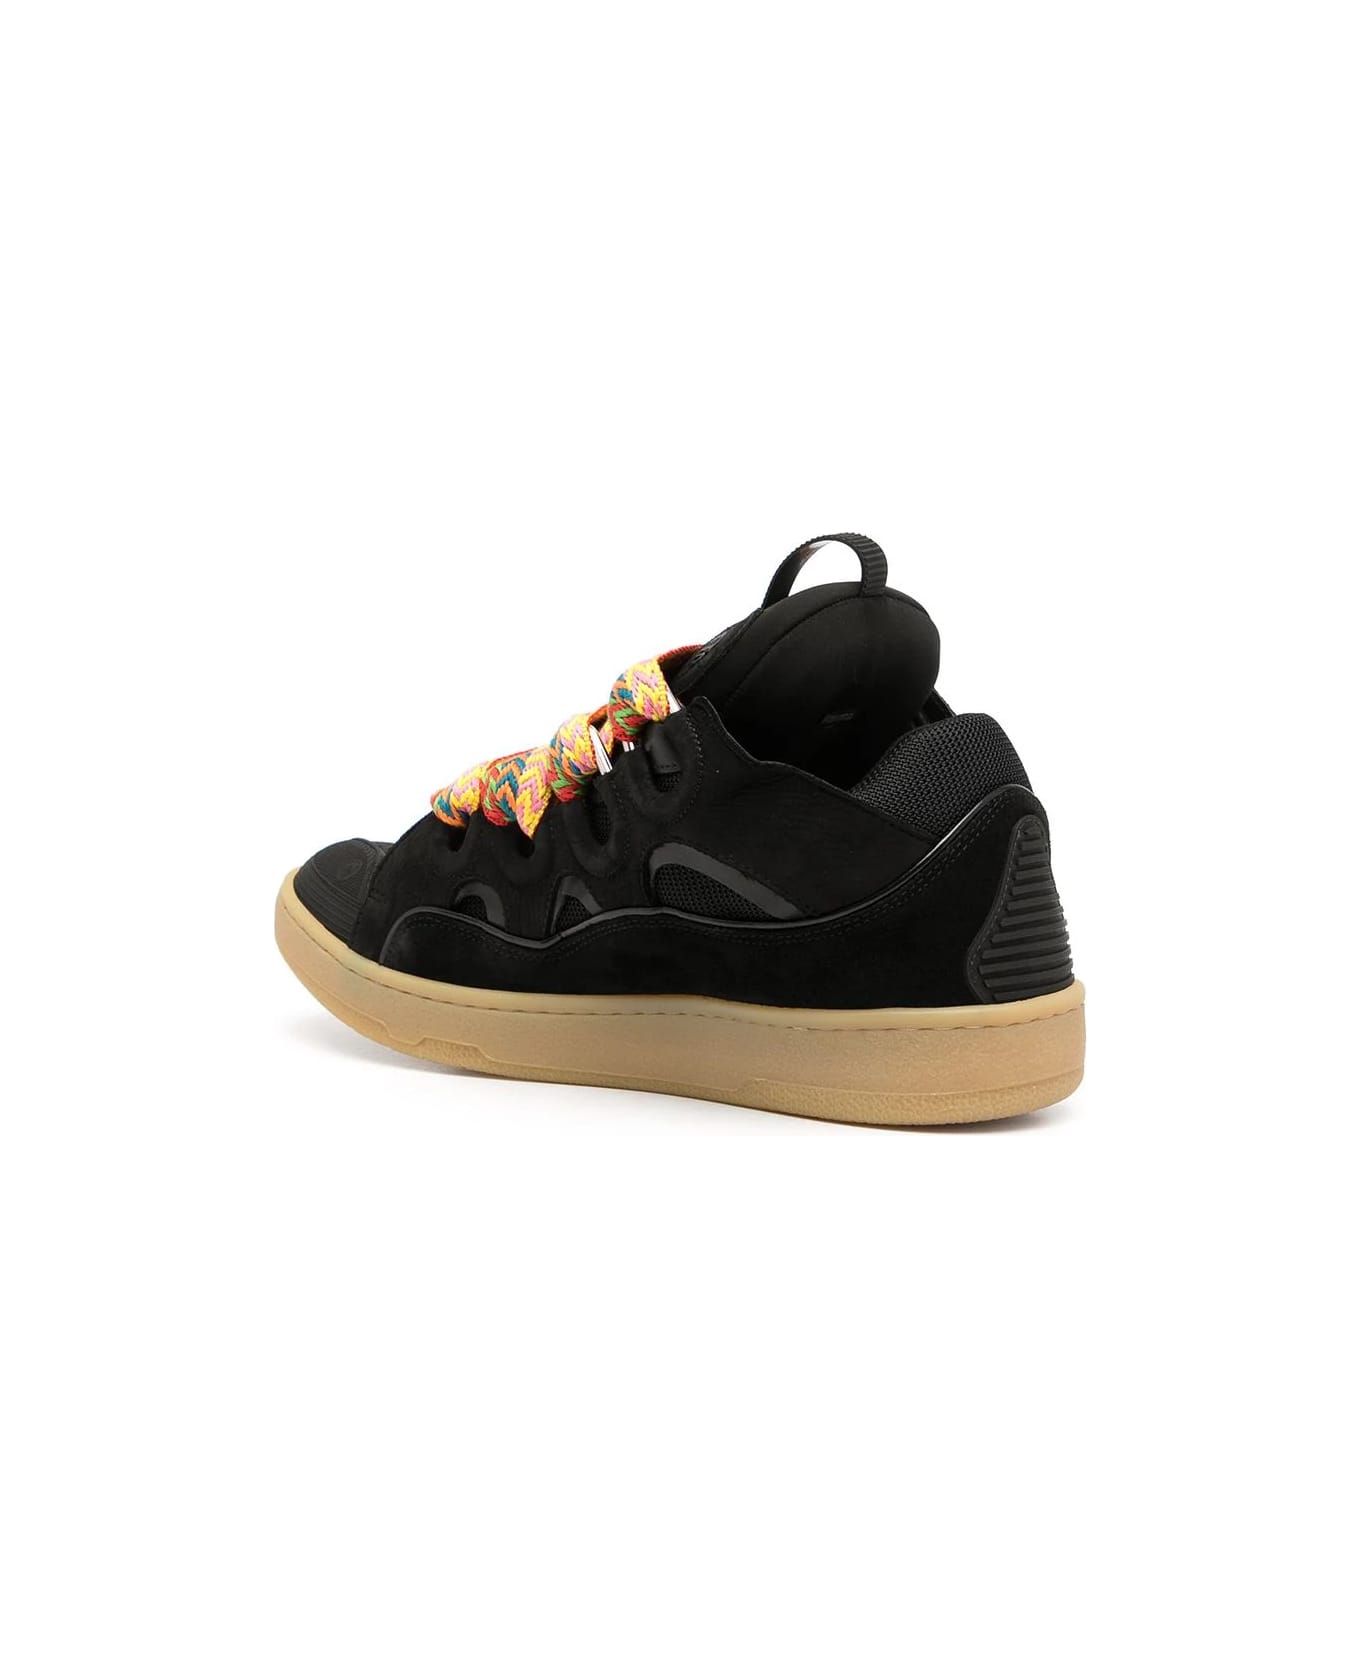 Lanvin "curb" Sneakers In Black Leather - Black